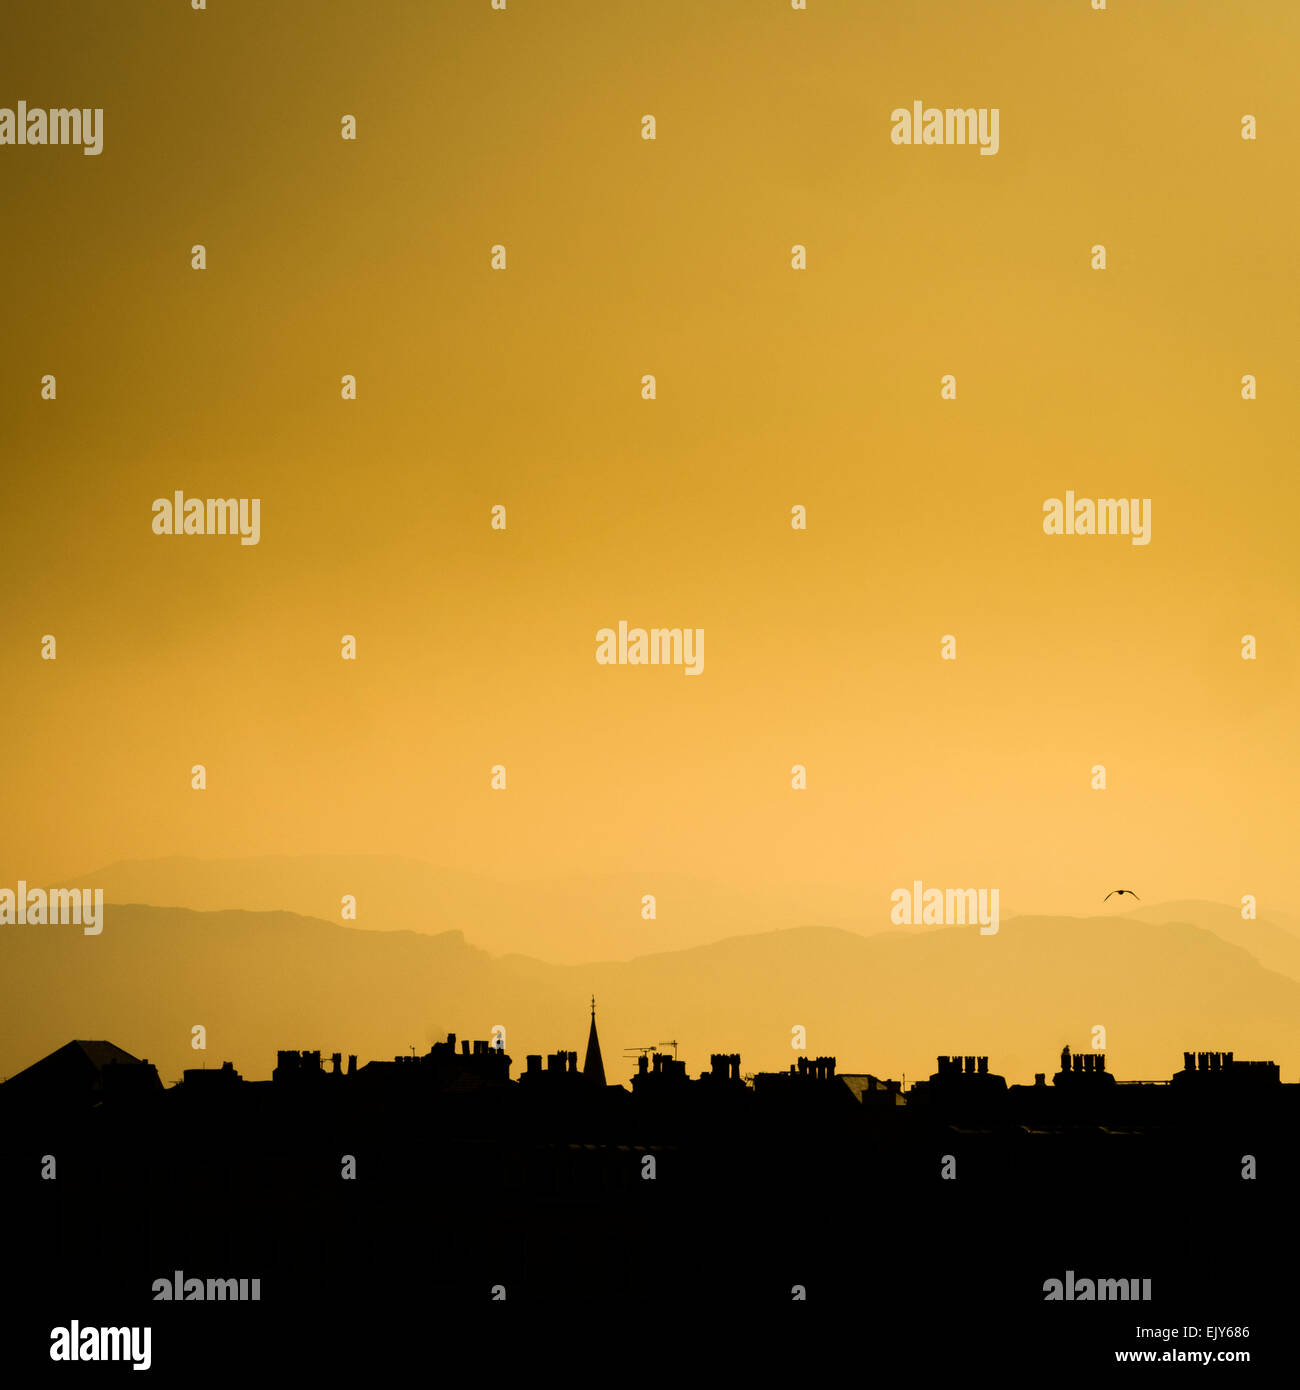 Golden light: The silhouette of rooftops at dusk, Llandudno, Conwy, North Wales UK Stock Photo